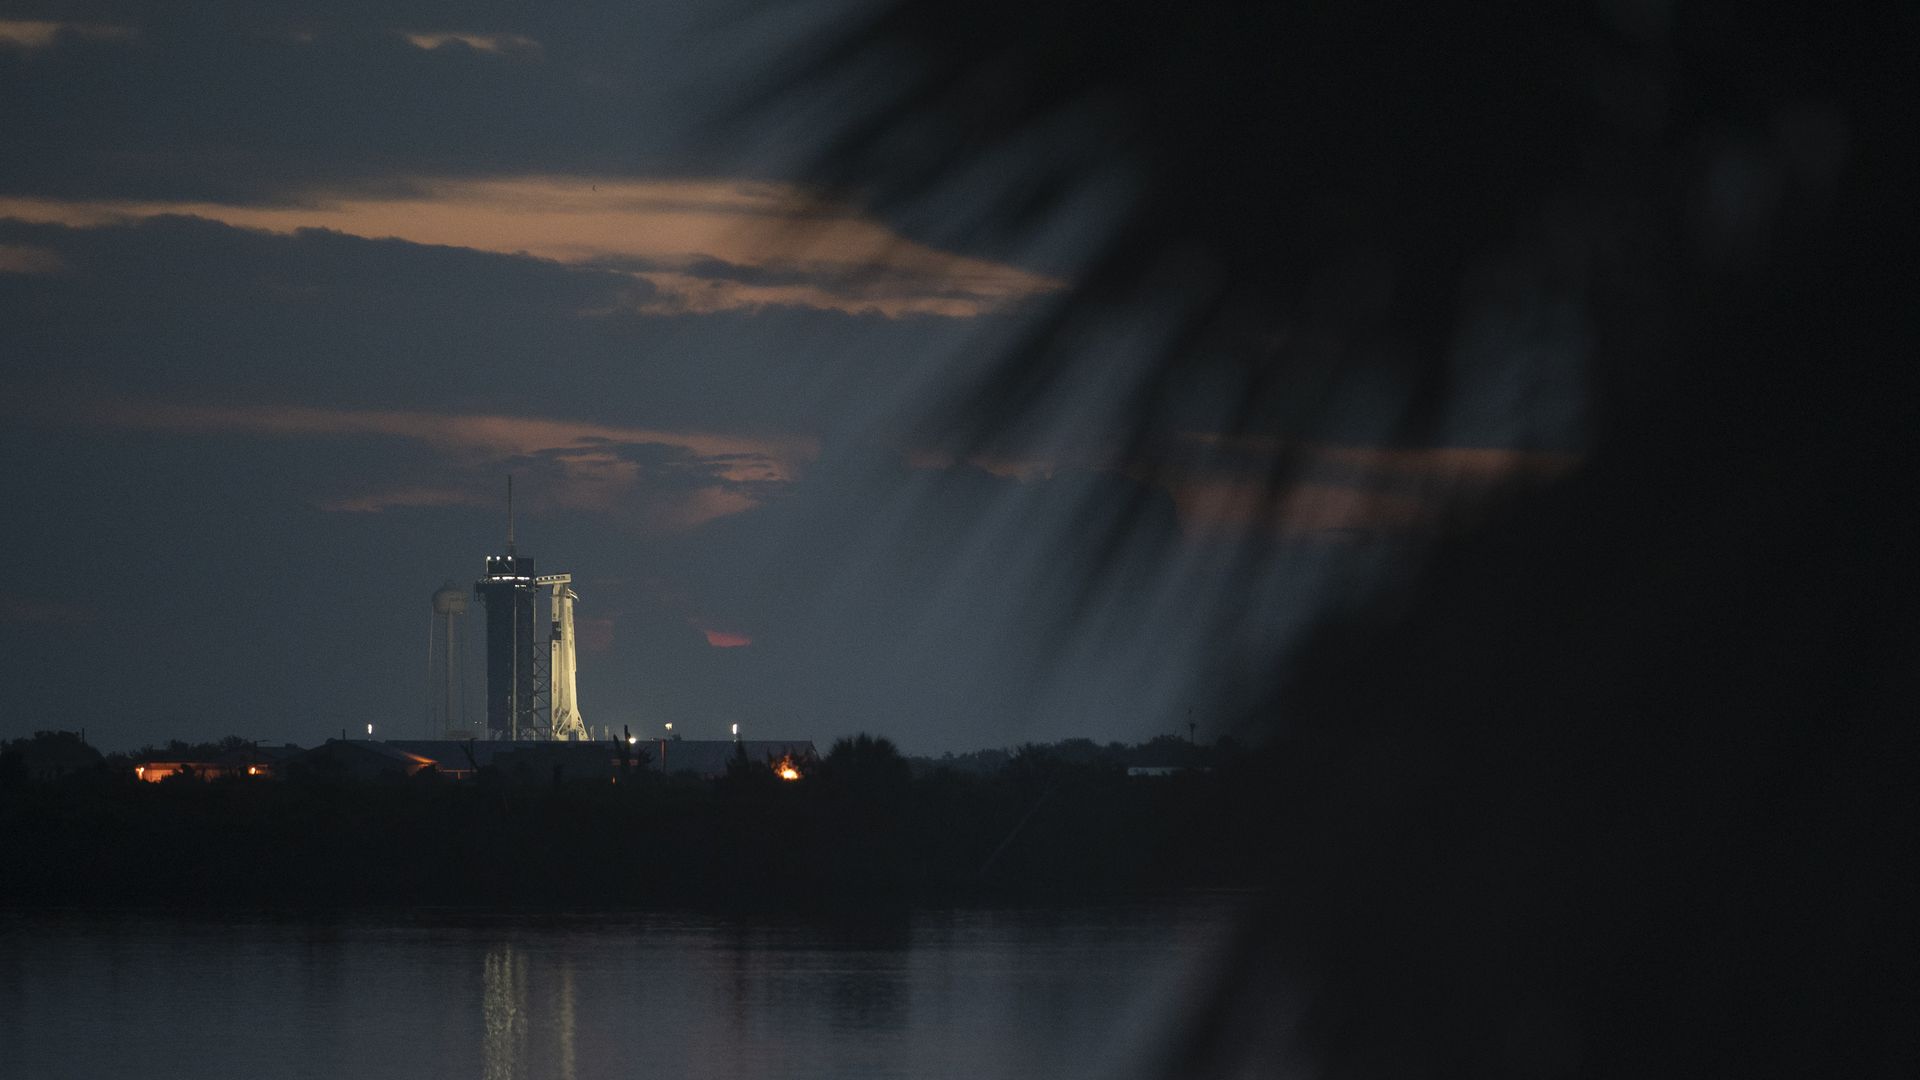 Sunrise on launch day with the Falcon 9 rocket in the distance. 